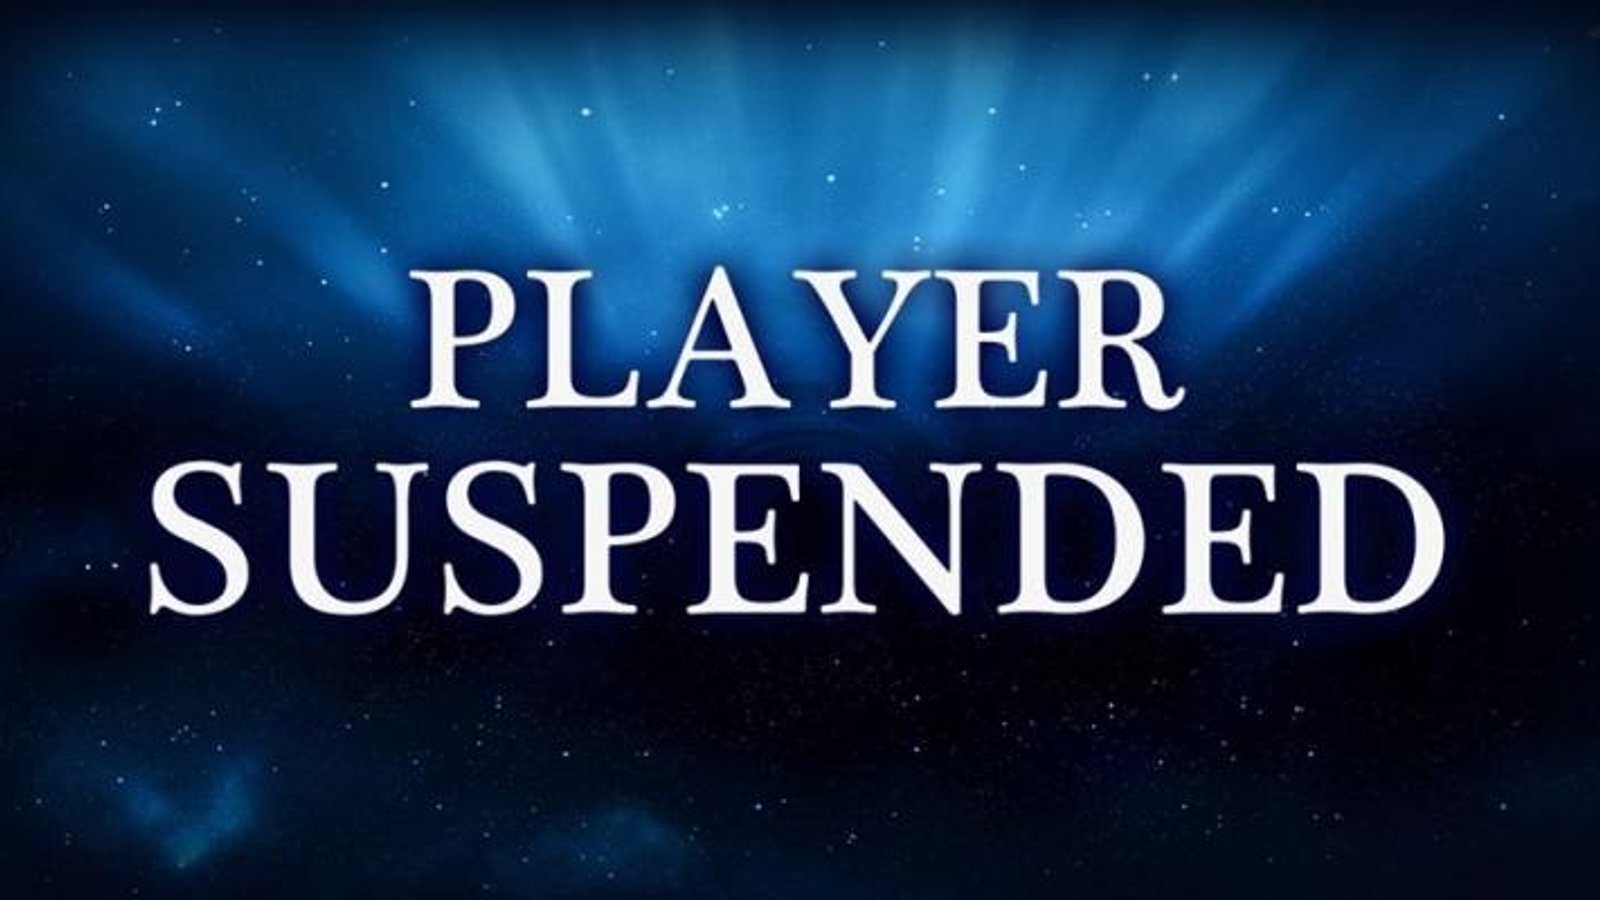 Player has been suspended for using Performance Enhancing Drugs.